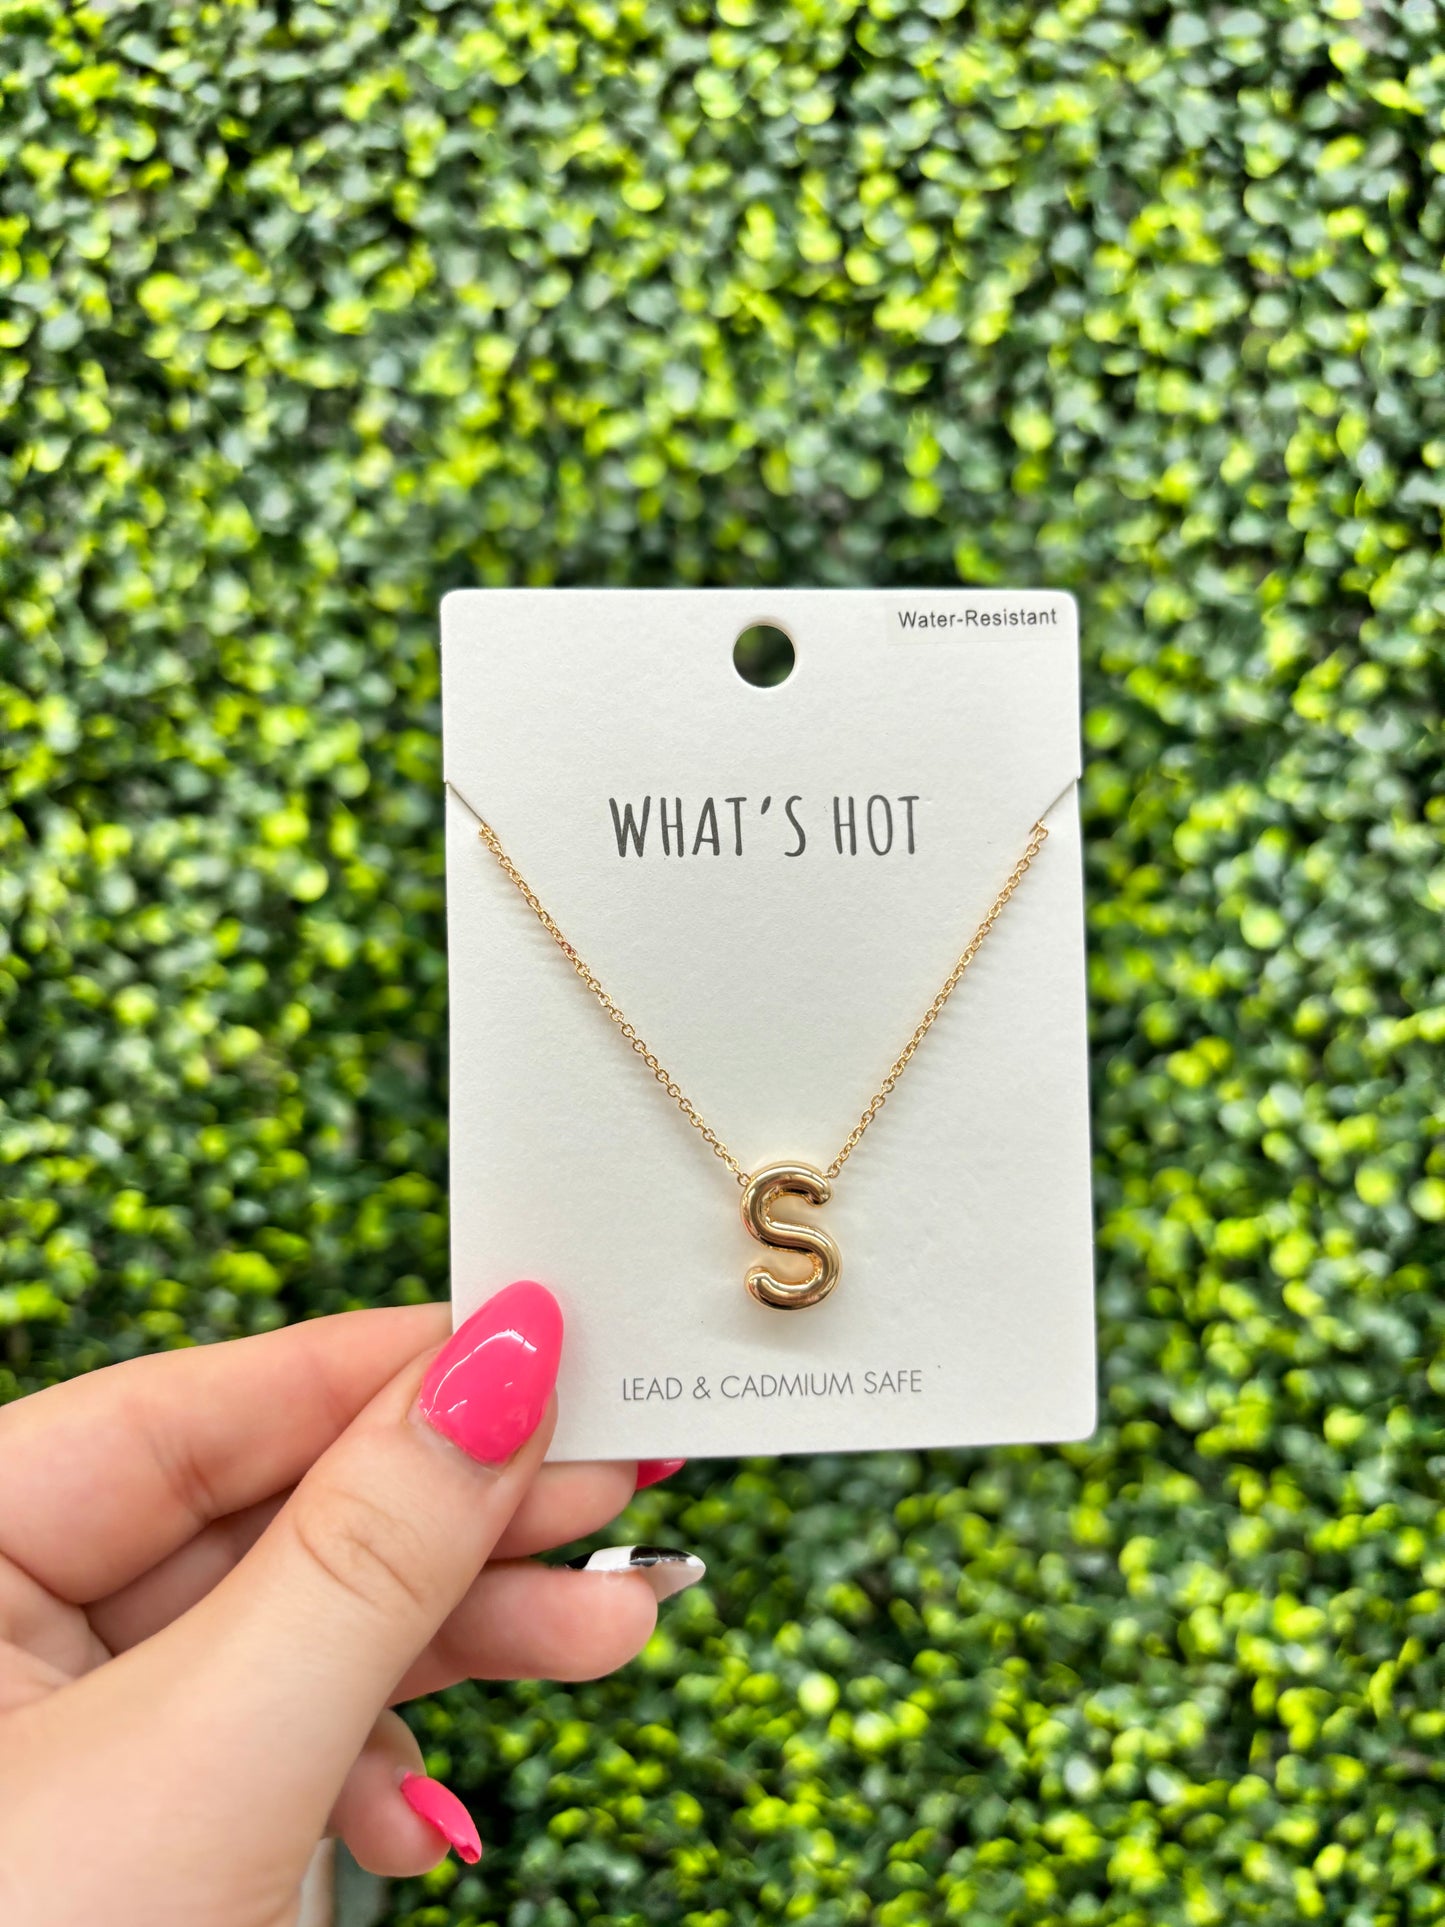 Gold initial Necklace